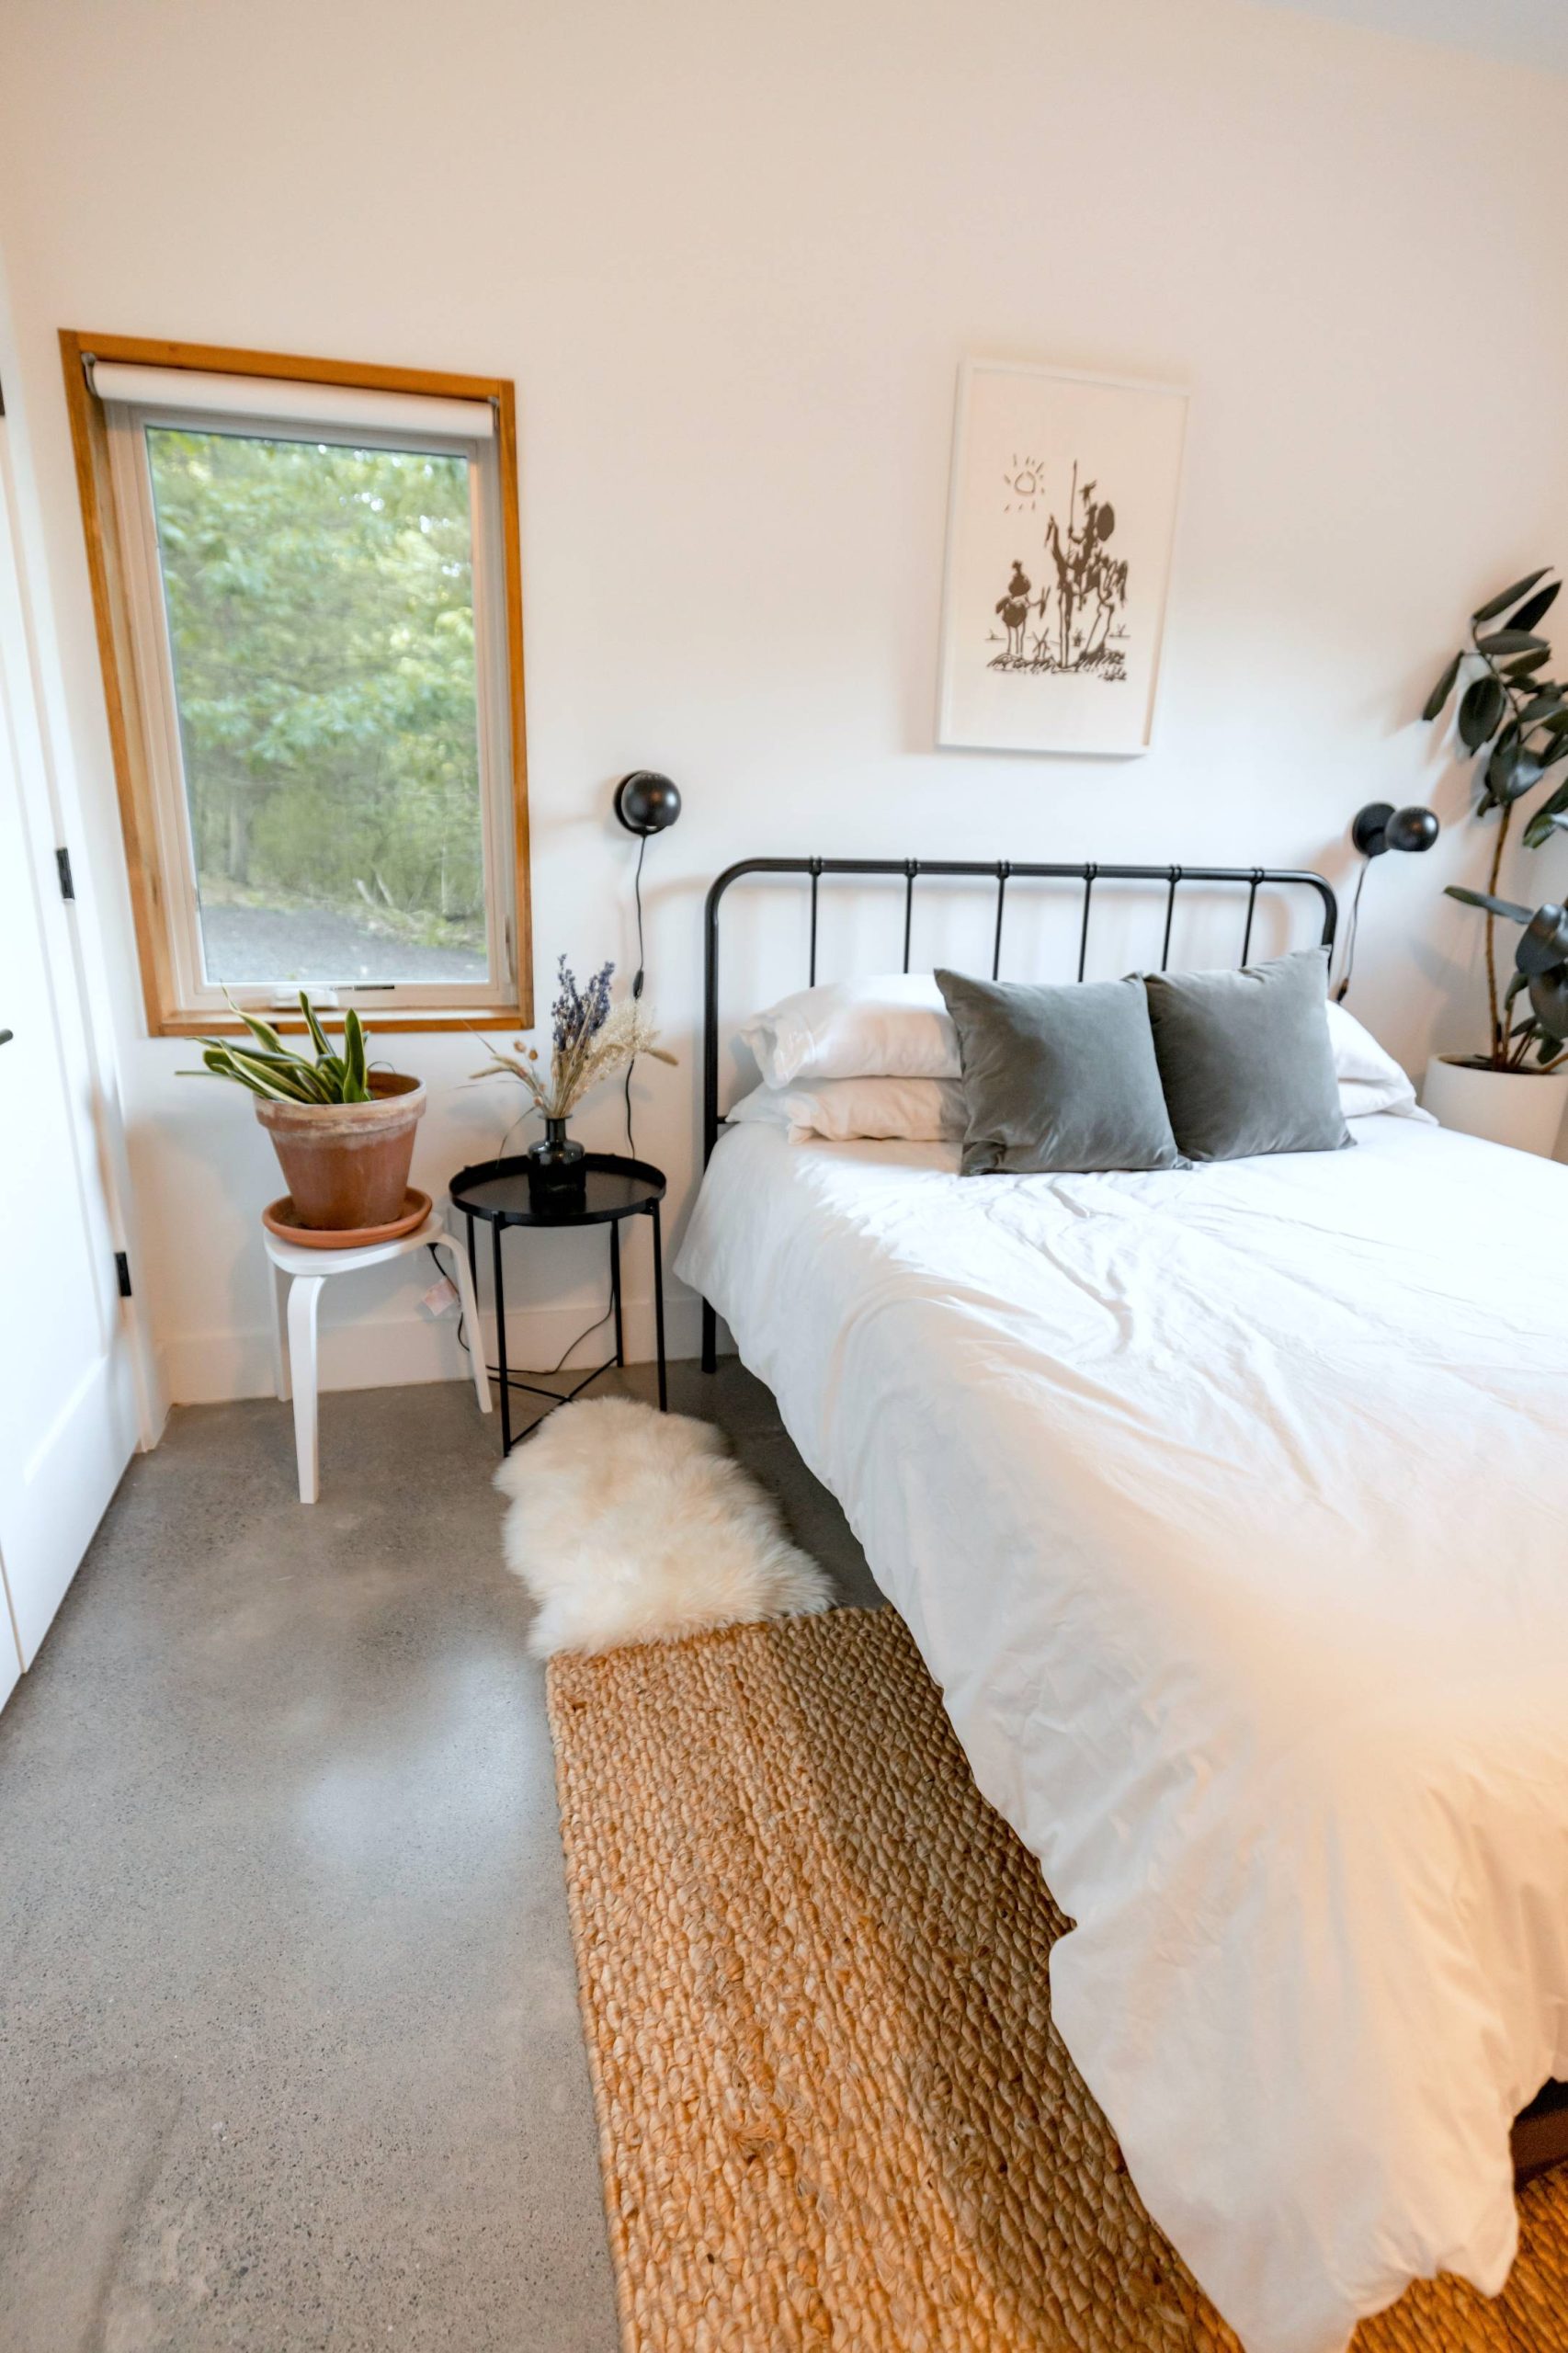 How to Airbnb your spare bedroom